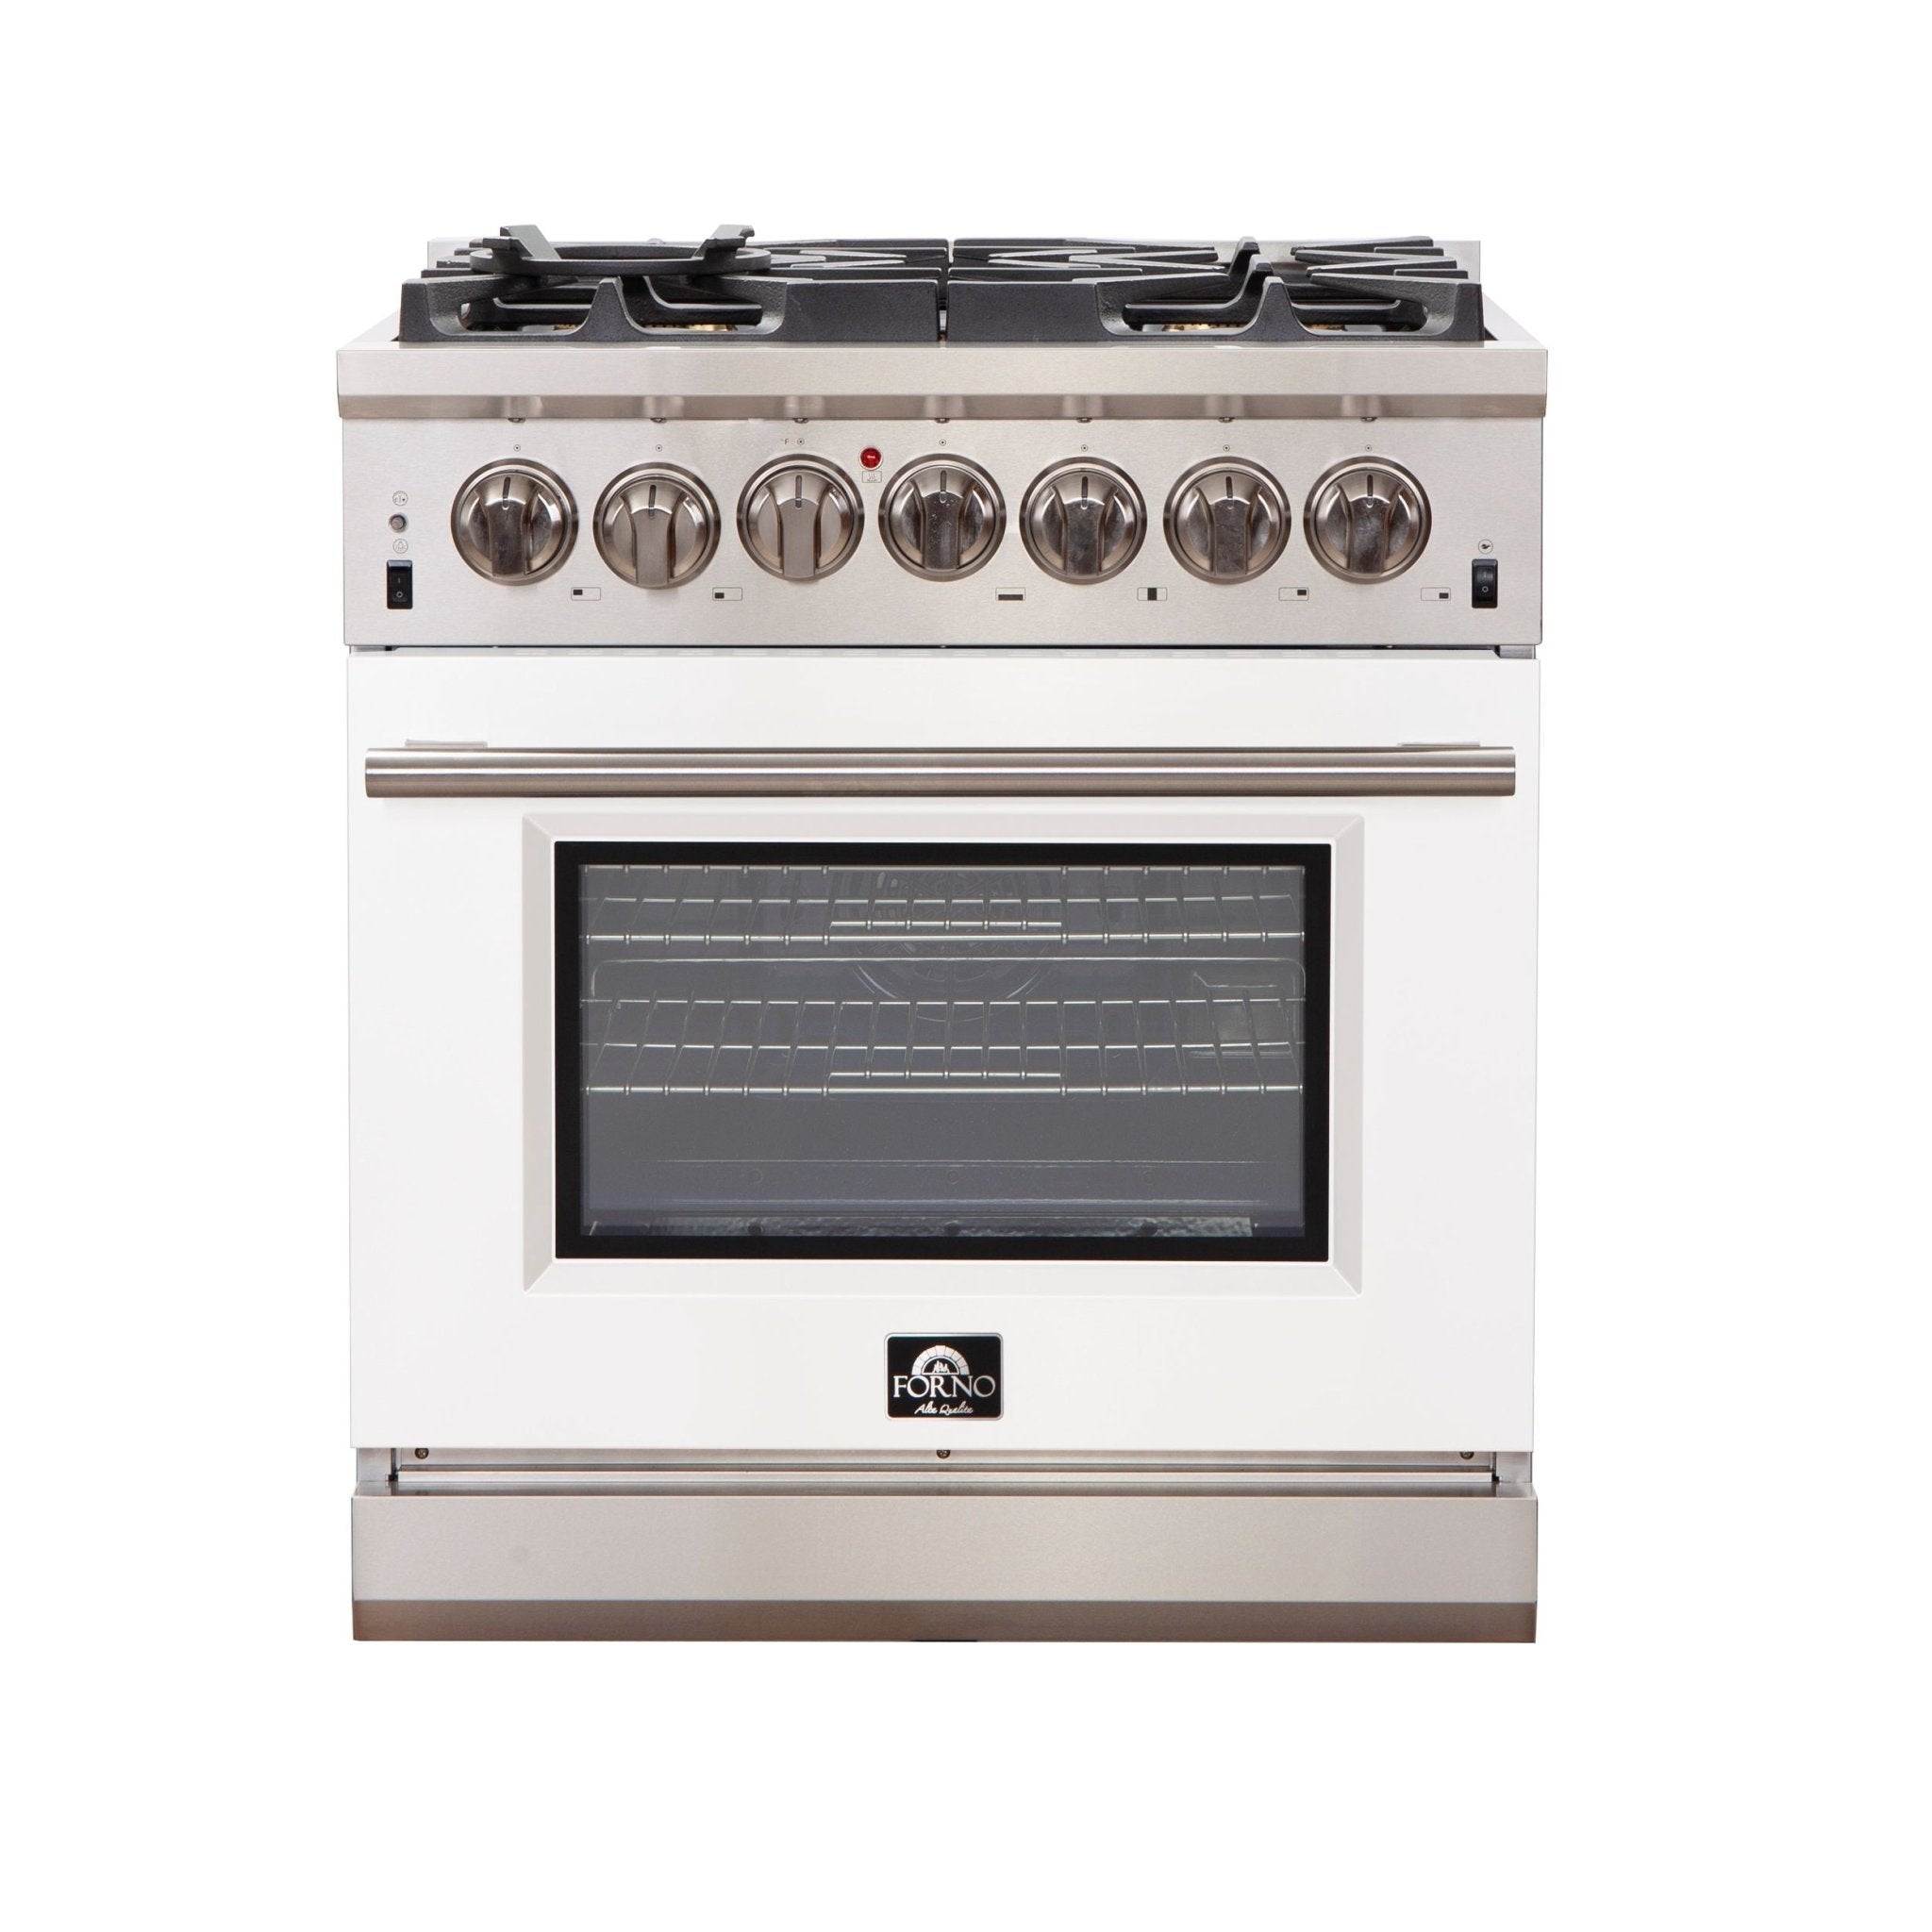 Forno 30″ Pro Series Capriasca Gas Burner / Gas Oven in Stainless Steel 5 Italian Burners, FFSGS6260-30 - Smart Kitchen Lab